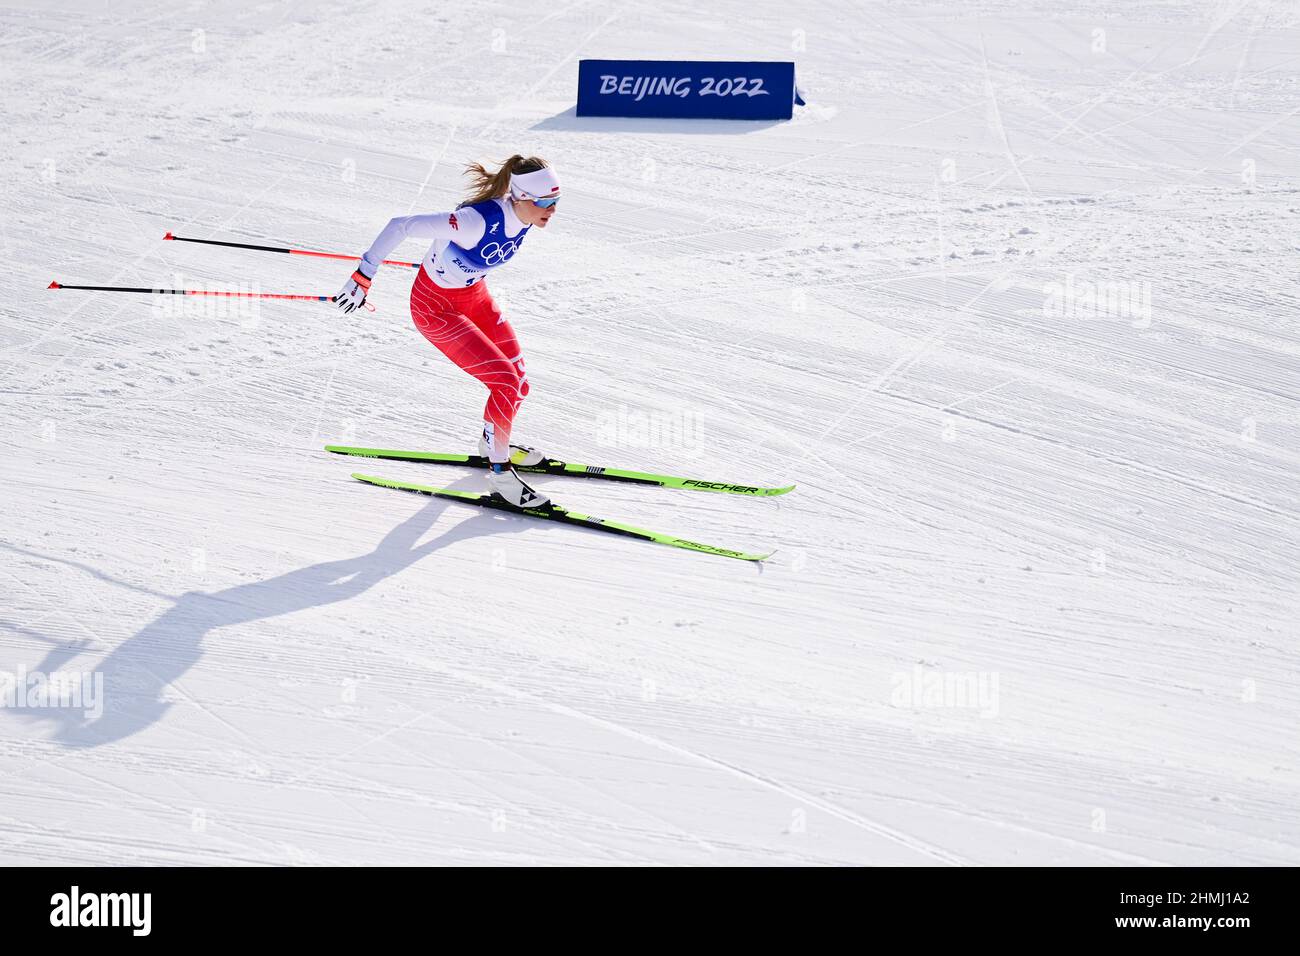 Zhangjiakou, China's Hebei Province. 10th Feb, 2022. Izabela Marcisz of Poland competes during cross-country skiing women's 10km classic at National Cross-Country Skiing Centre in Zhangjiakou, north China's Hebei Province, Feb. 10, 2022. Credit: Zhang Hongxiang/Xinhua/Alamy Live News Stock Photo